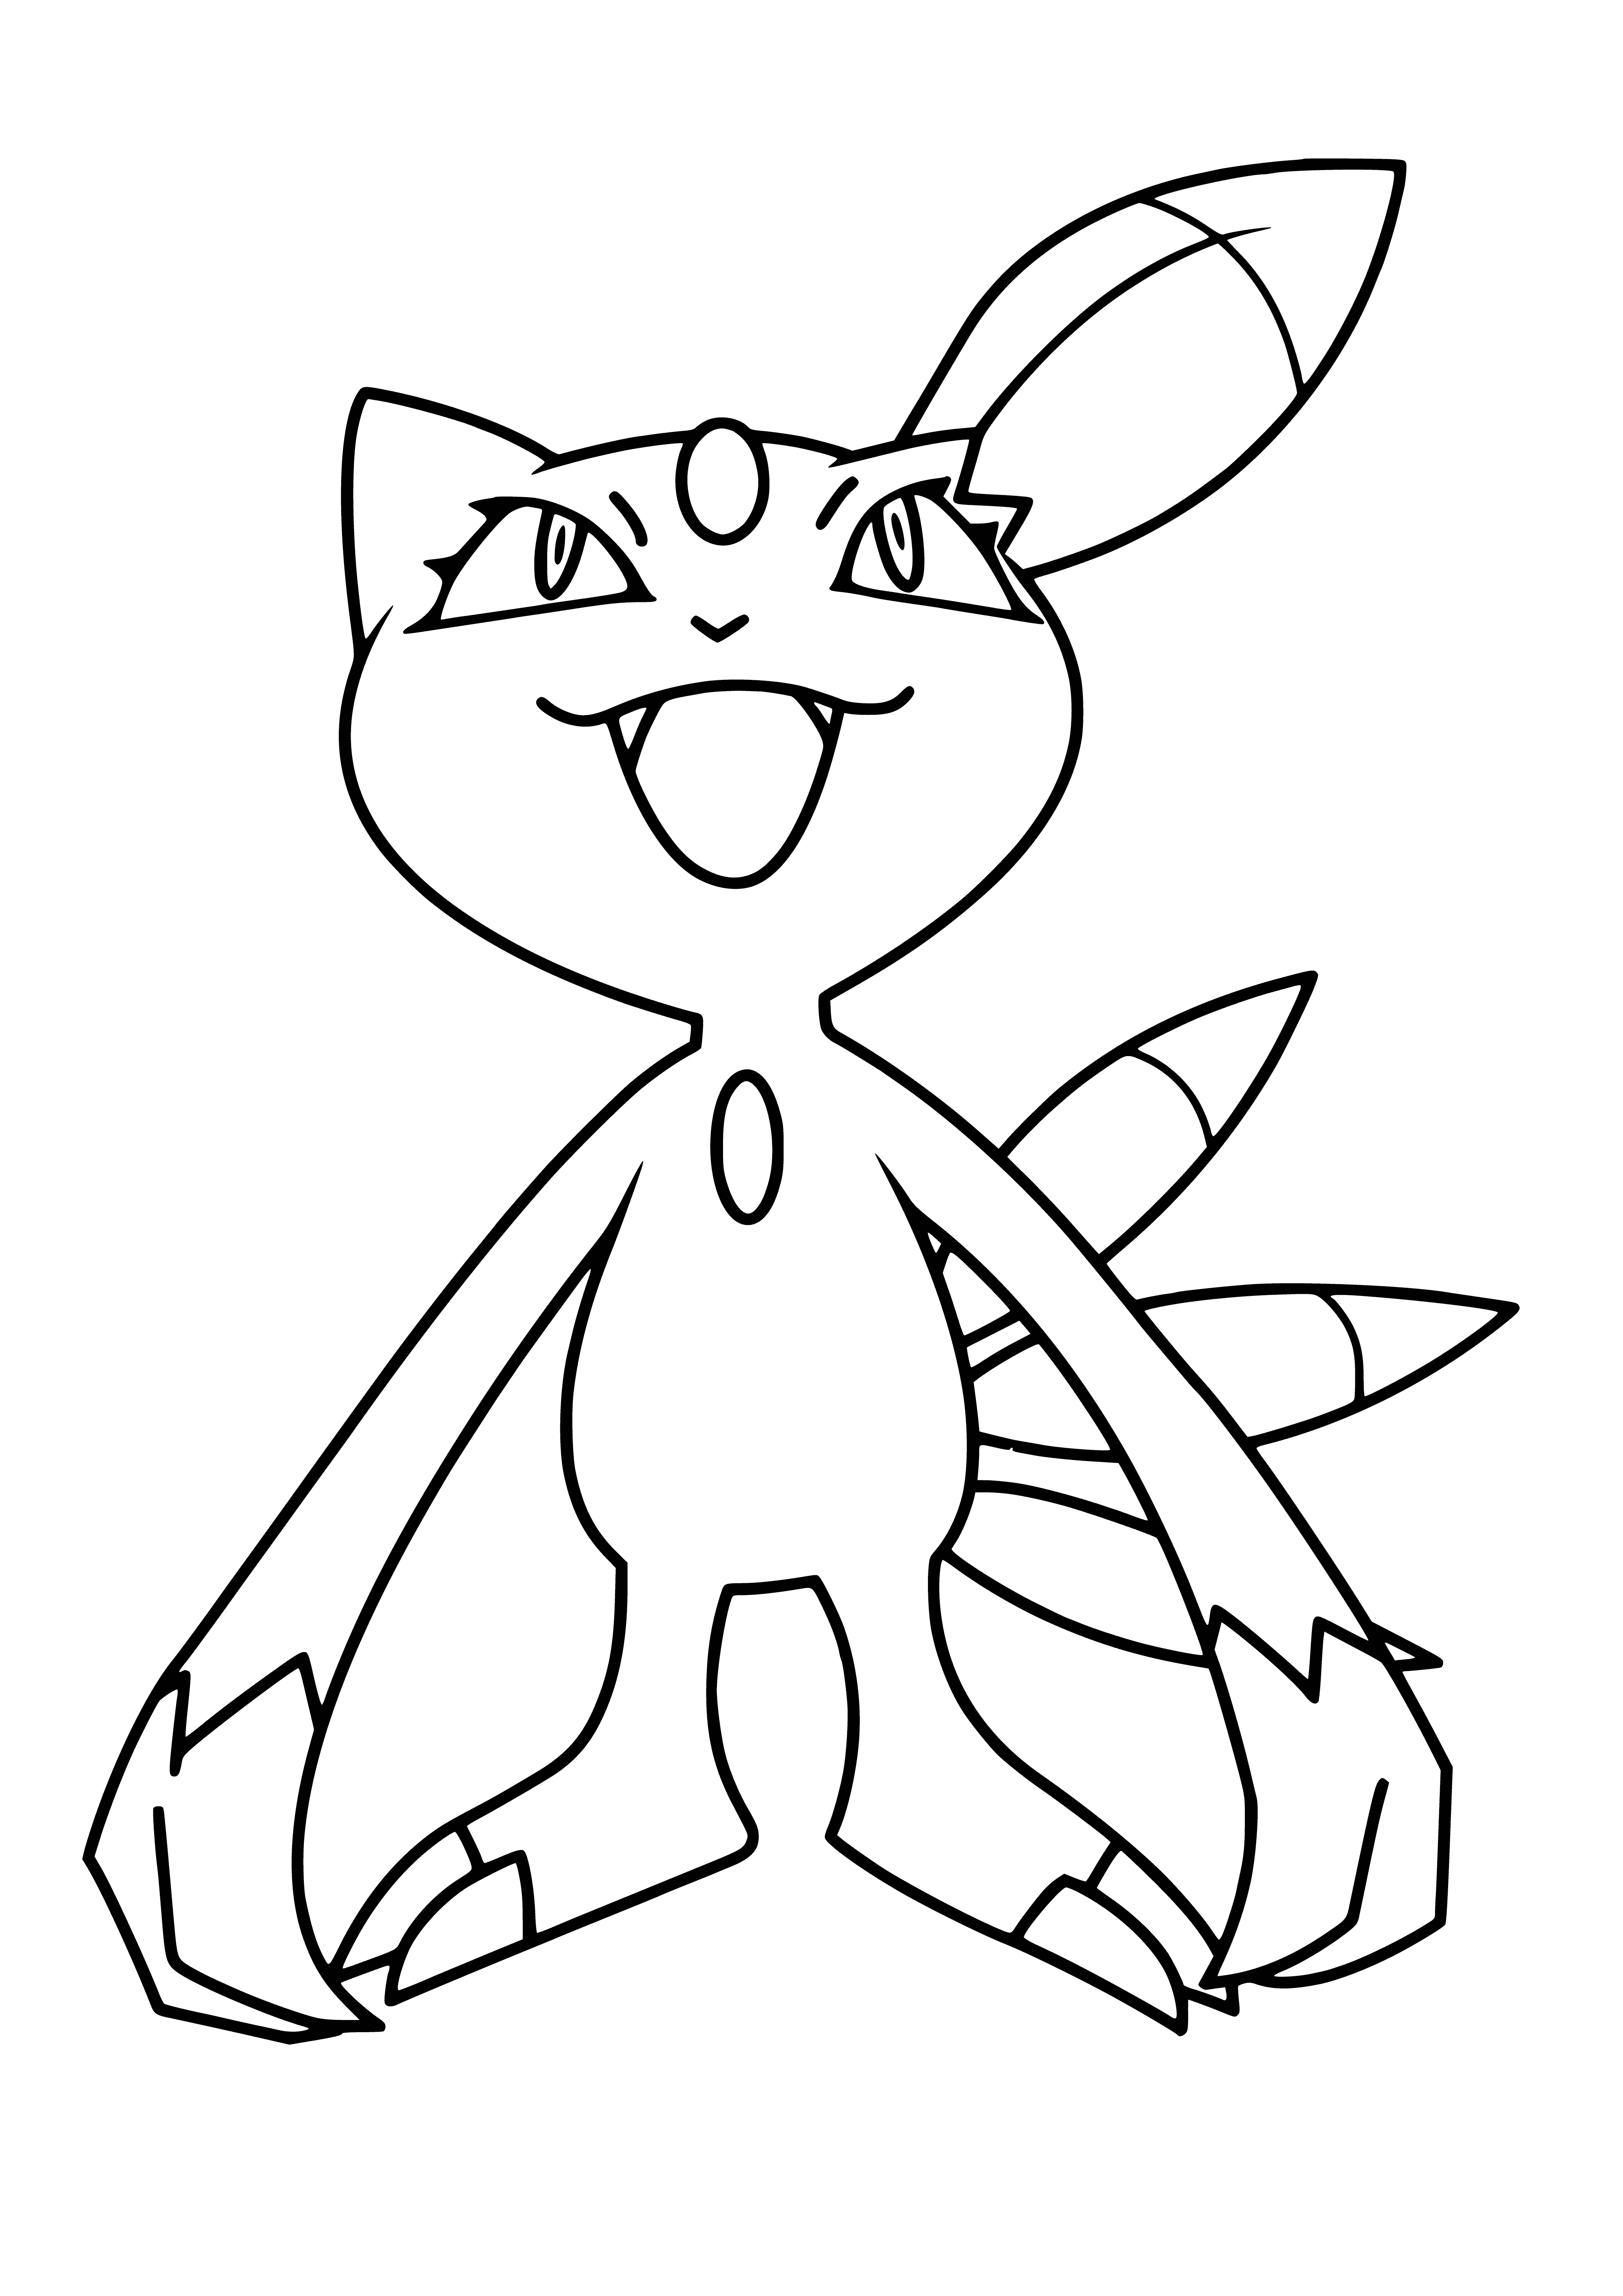 coloring page: Sneasel is a dark furred, resourceful, and agile Pokemon with a sinister gleam in its eyes. It fights with its claws and teeth, often using devious tactics to gain the advantage.